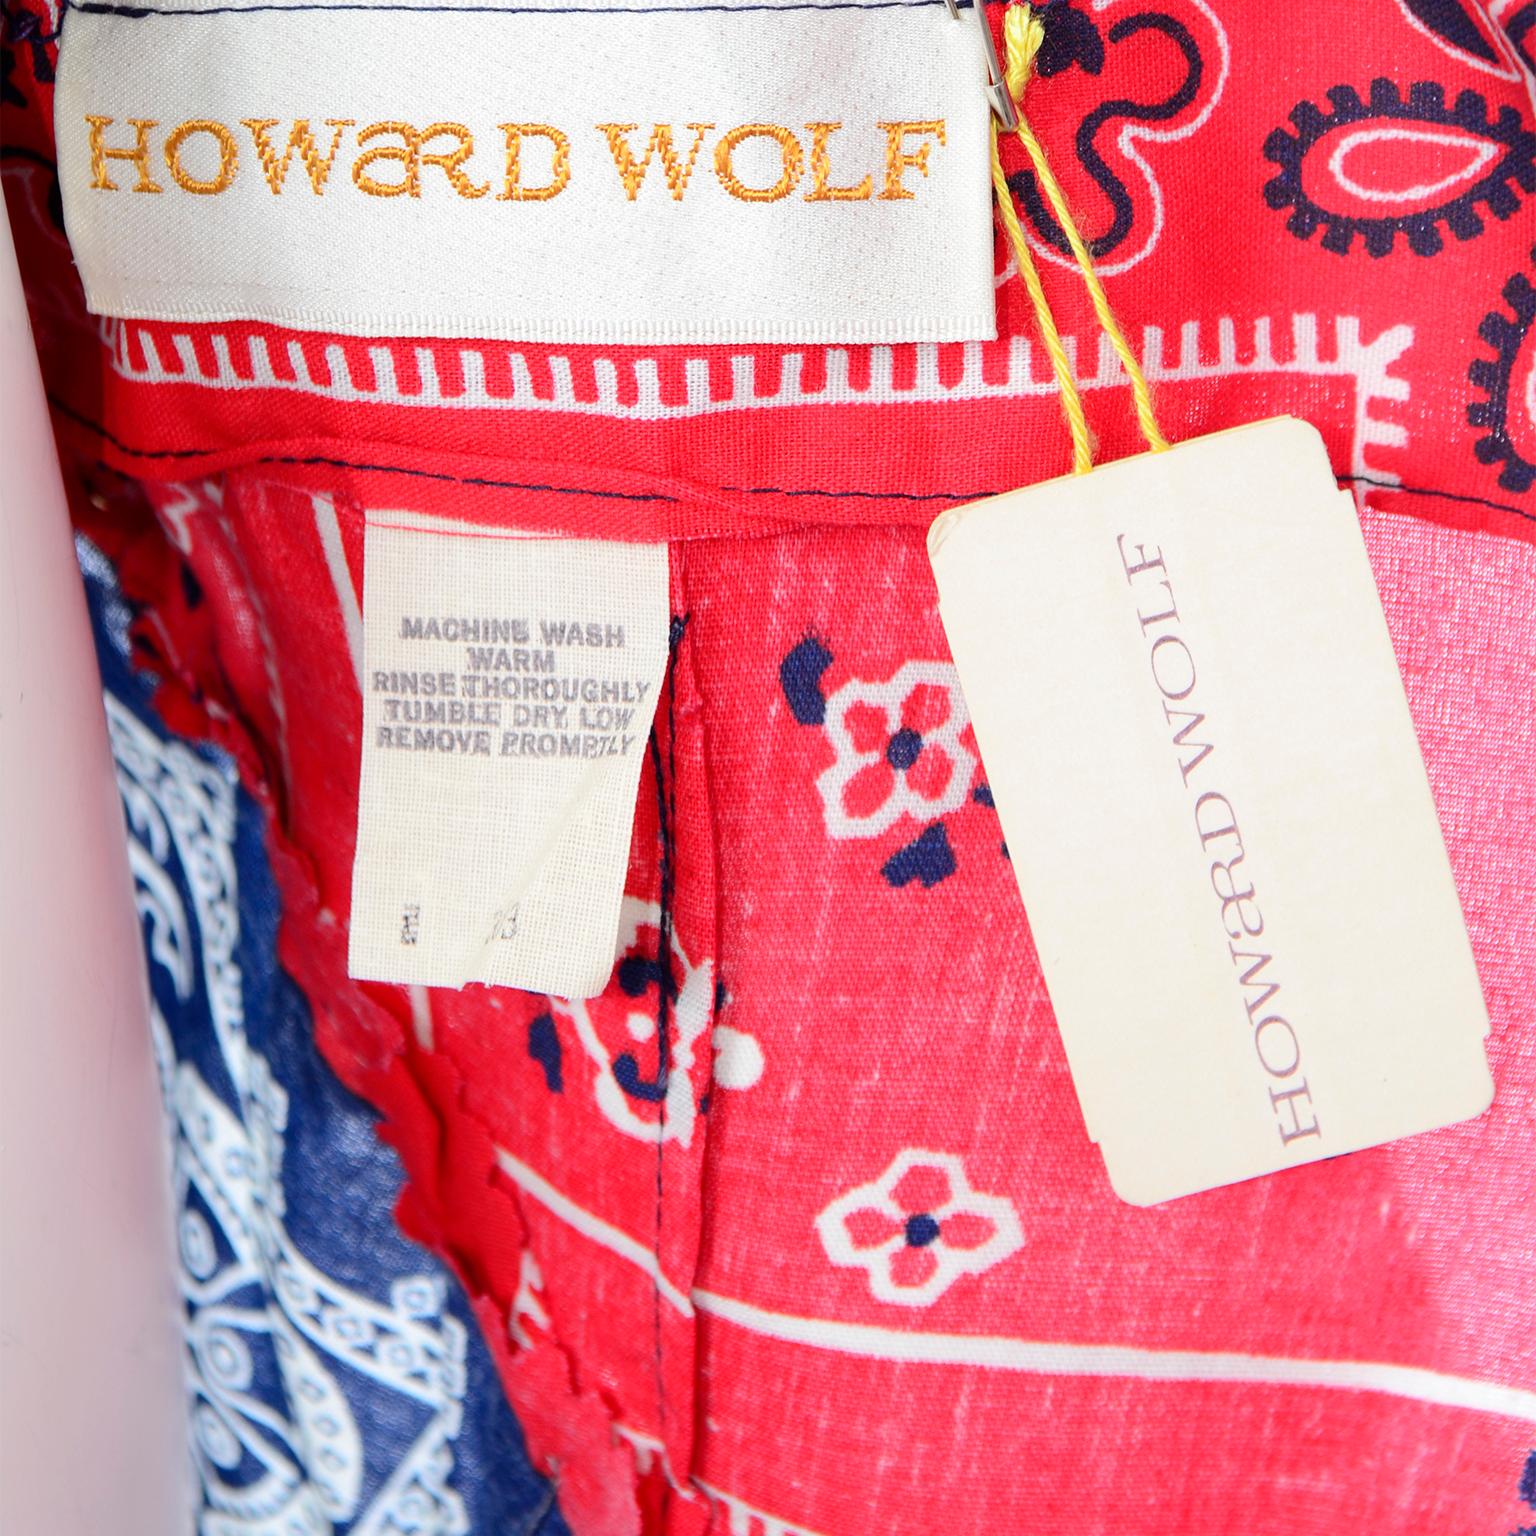 Vintage Howard Wolf Blue & Red Patchwork Bandana Print Dress Deadstock w tags 2